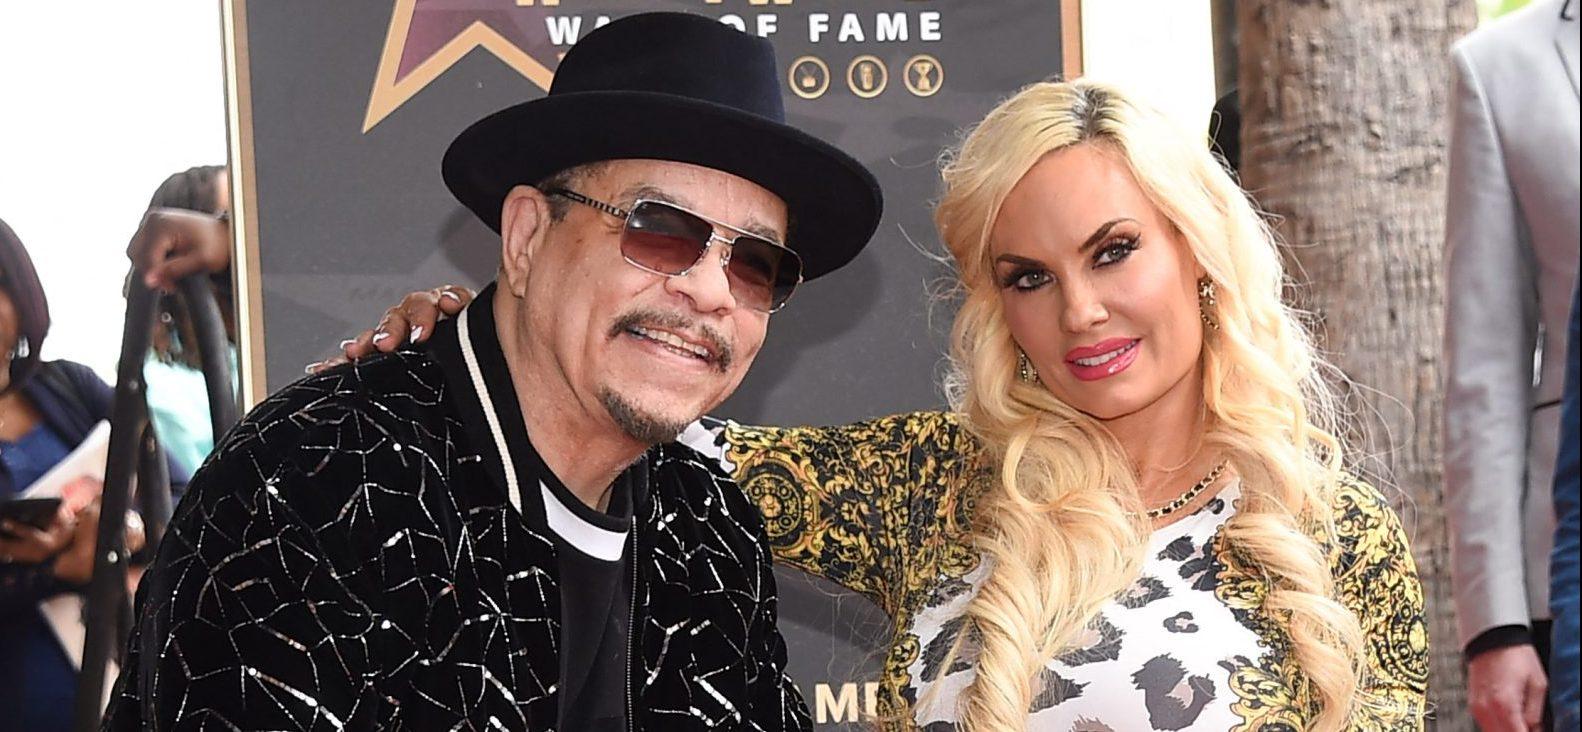 Ice-T Defends Wife Coco Austin’s Very Racy 4th Of July Outfit From ‘Weirdo’ Fans